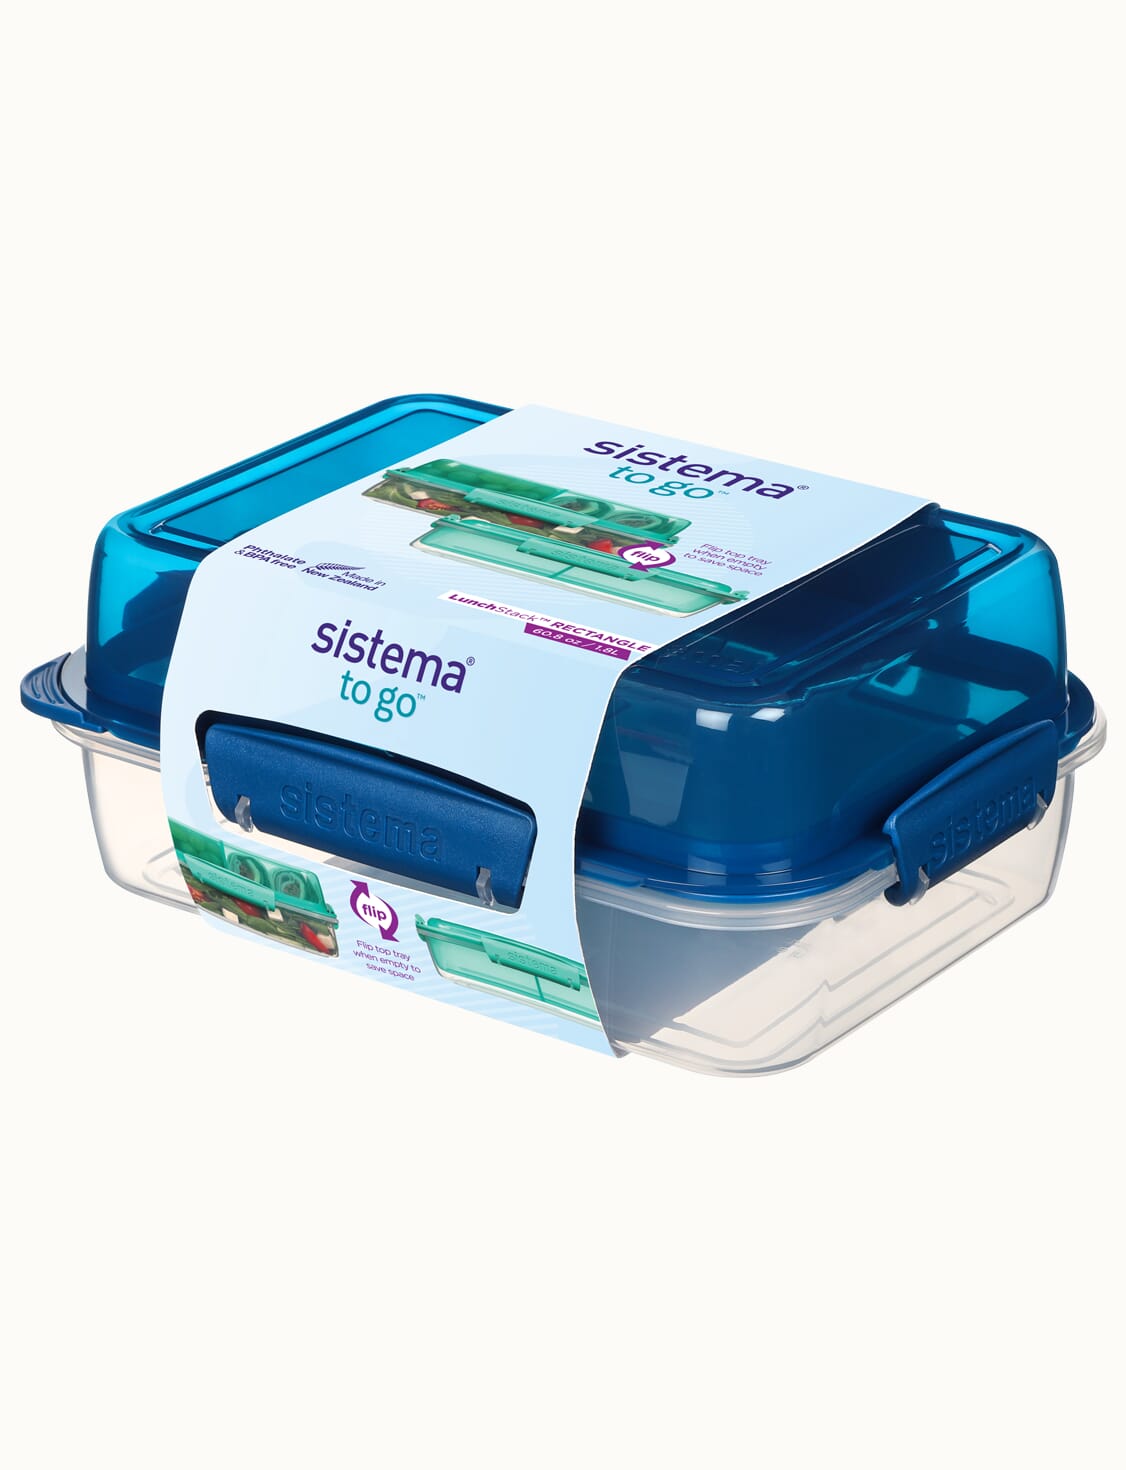 https://stergita.sirv.com/sistema/catalog/product/2/1/21710_lunchstackrectangle_togo_angle_label_english_oceanblue.png?canvas.color=fcfbf8